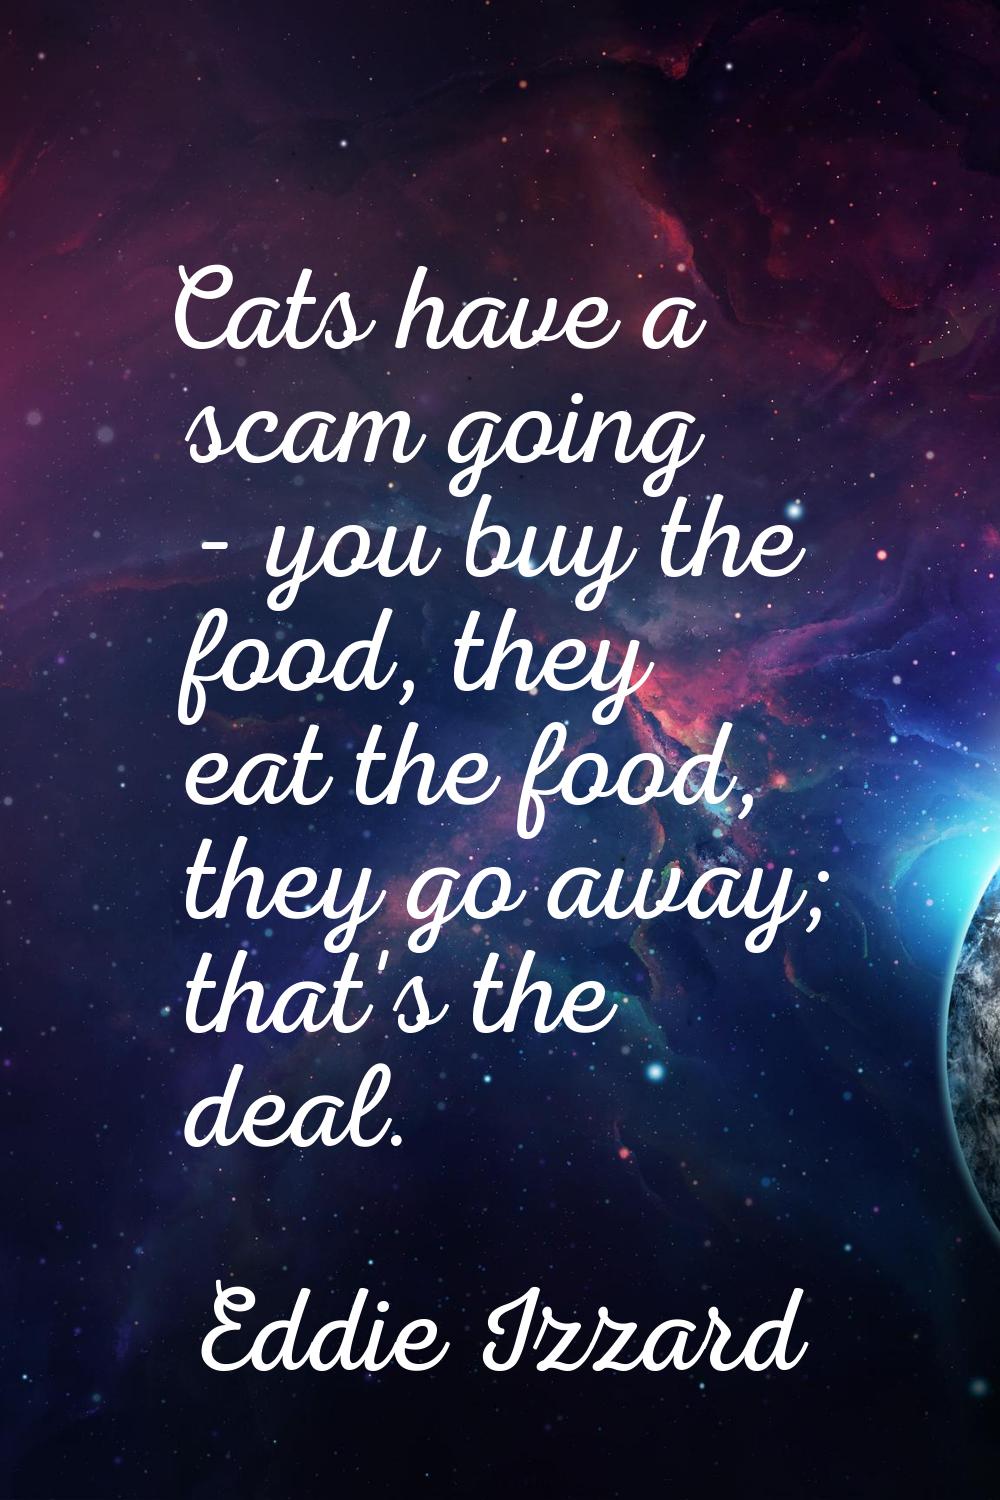 Cats have a scam going - you buy the food, they eat the food, they go away; that's the deal.